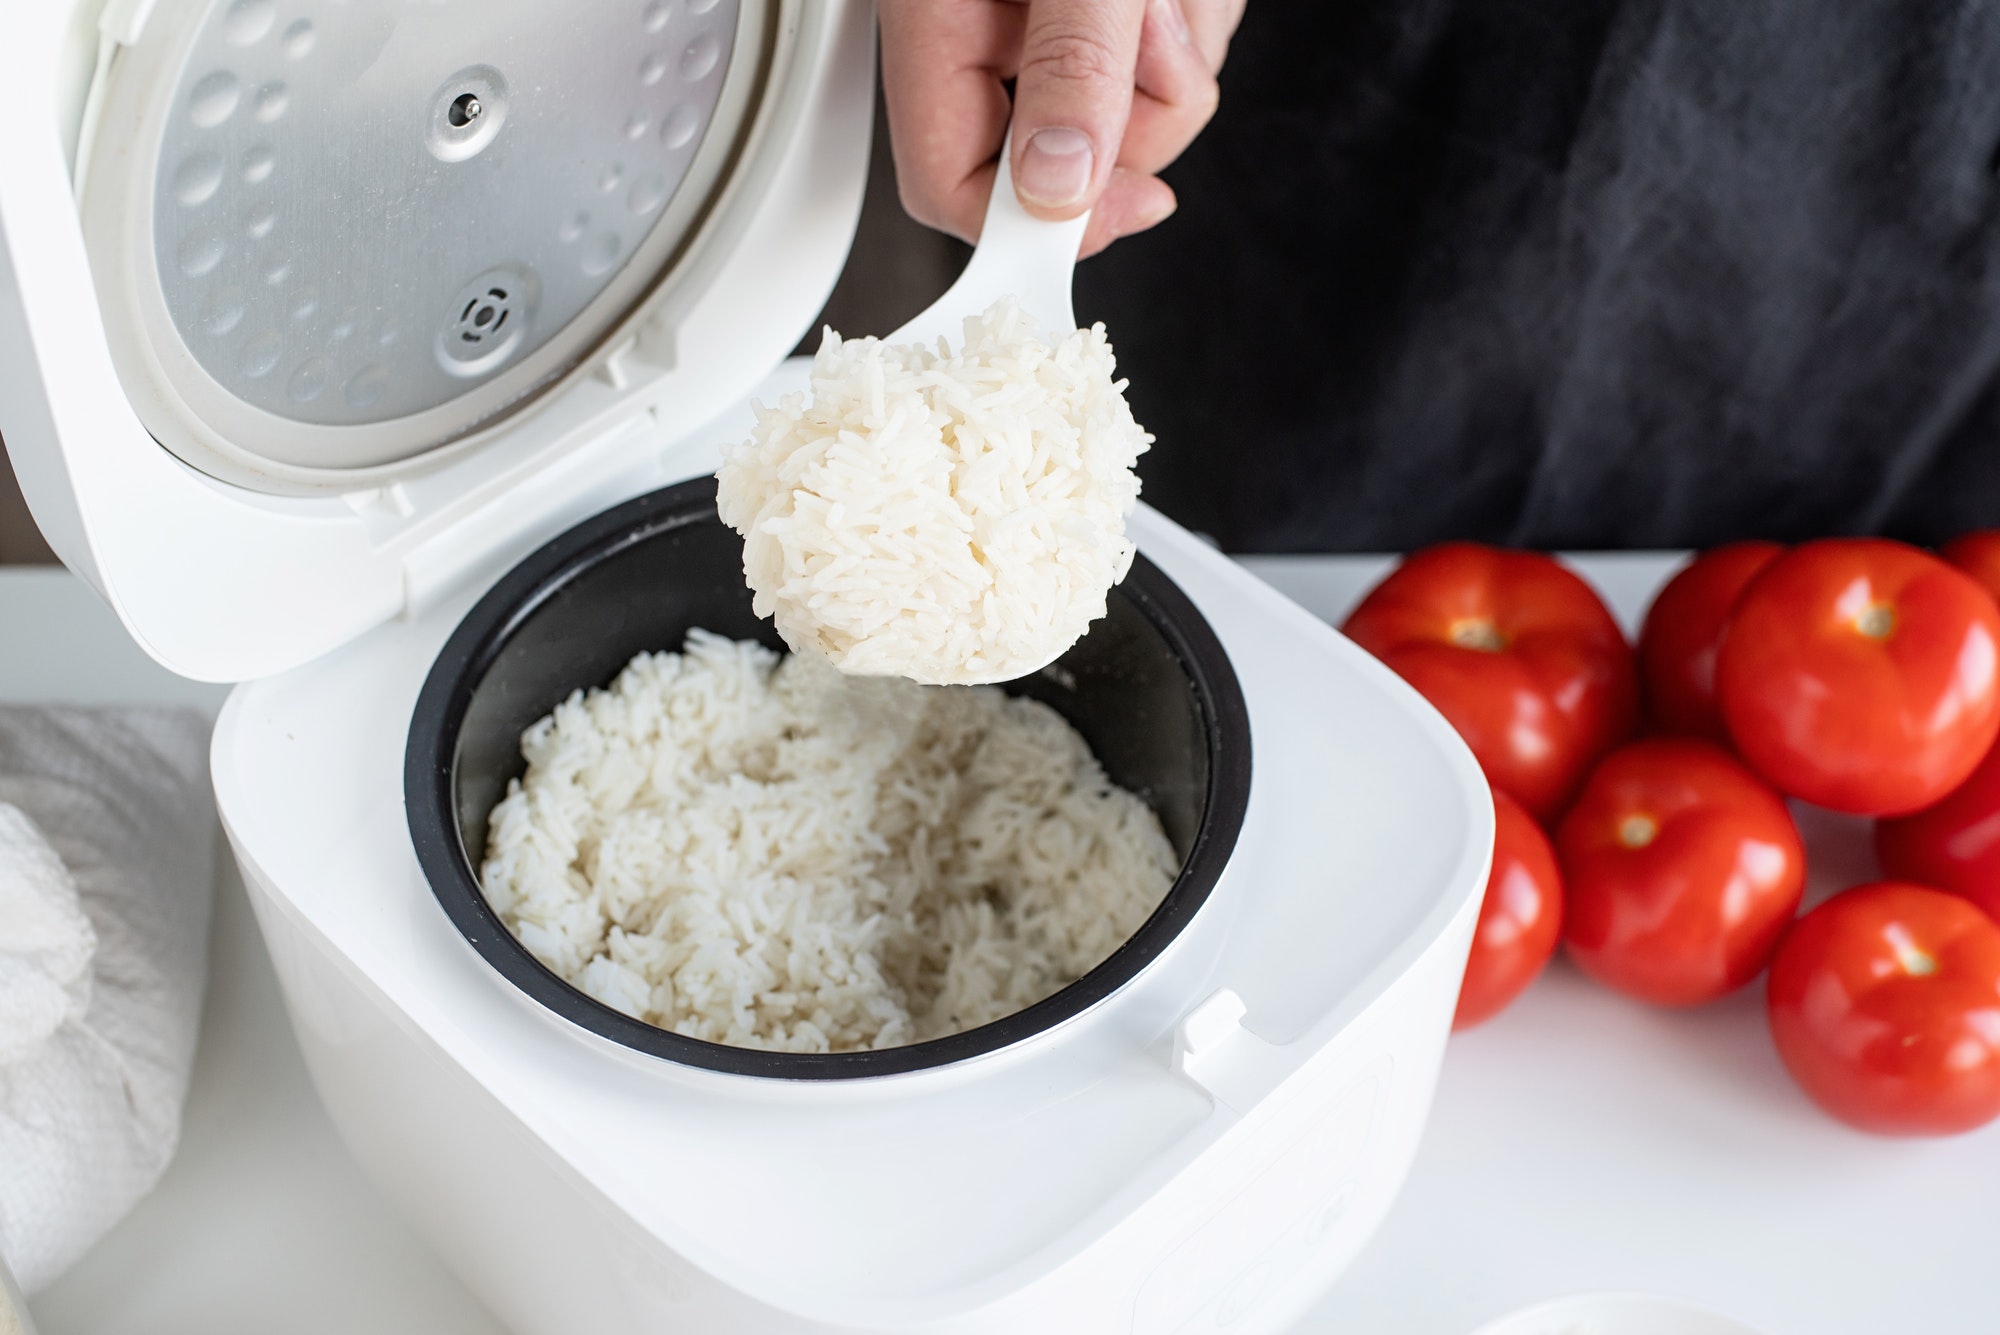 Use a Rice Cooker for perfect rice every time!